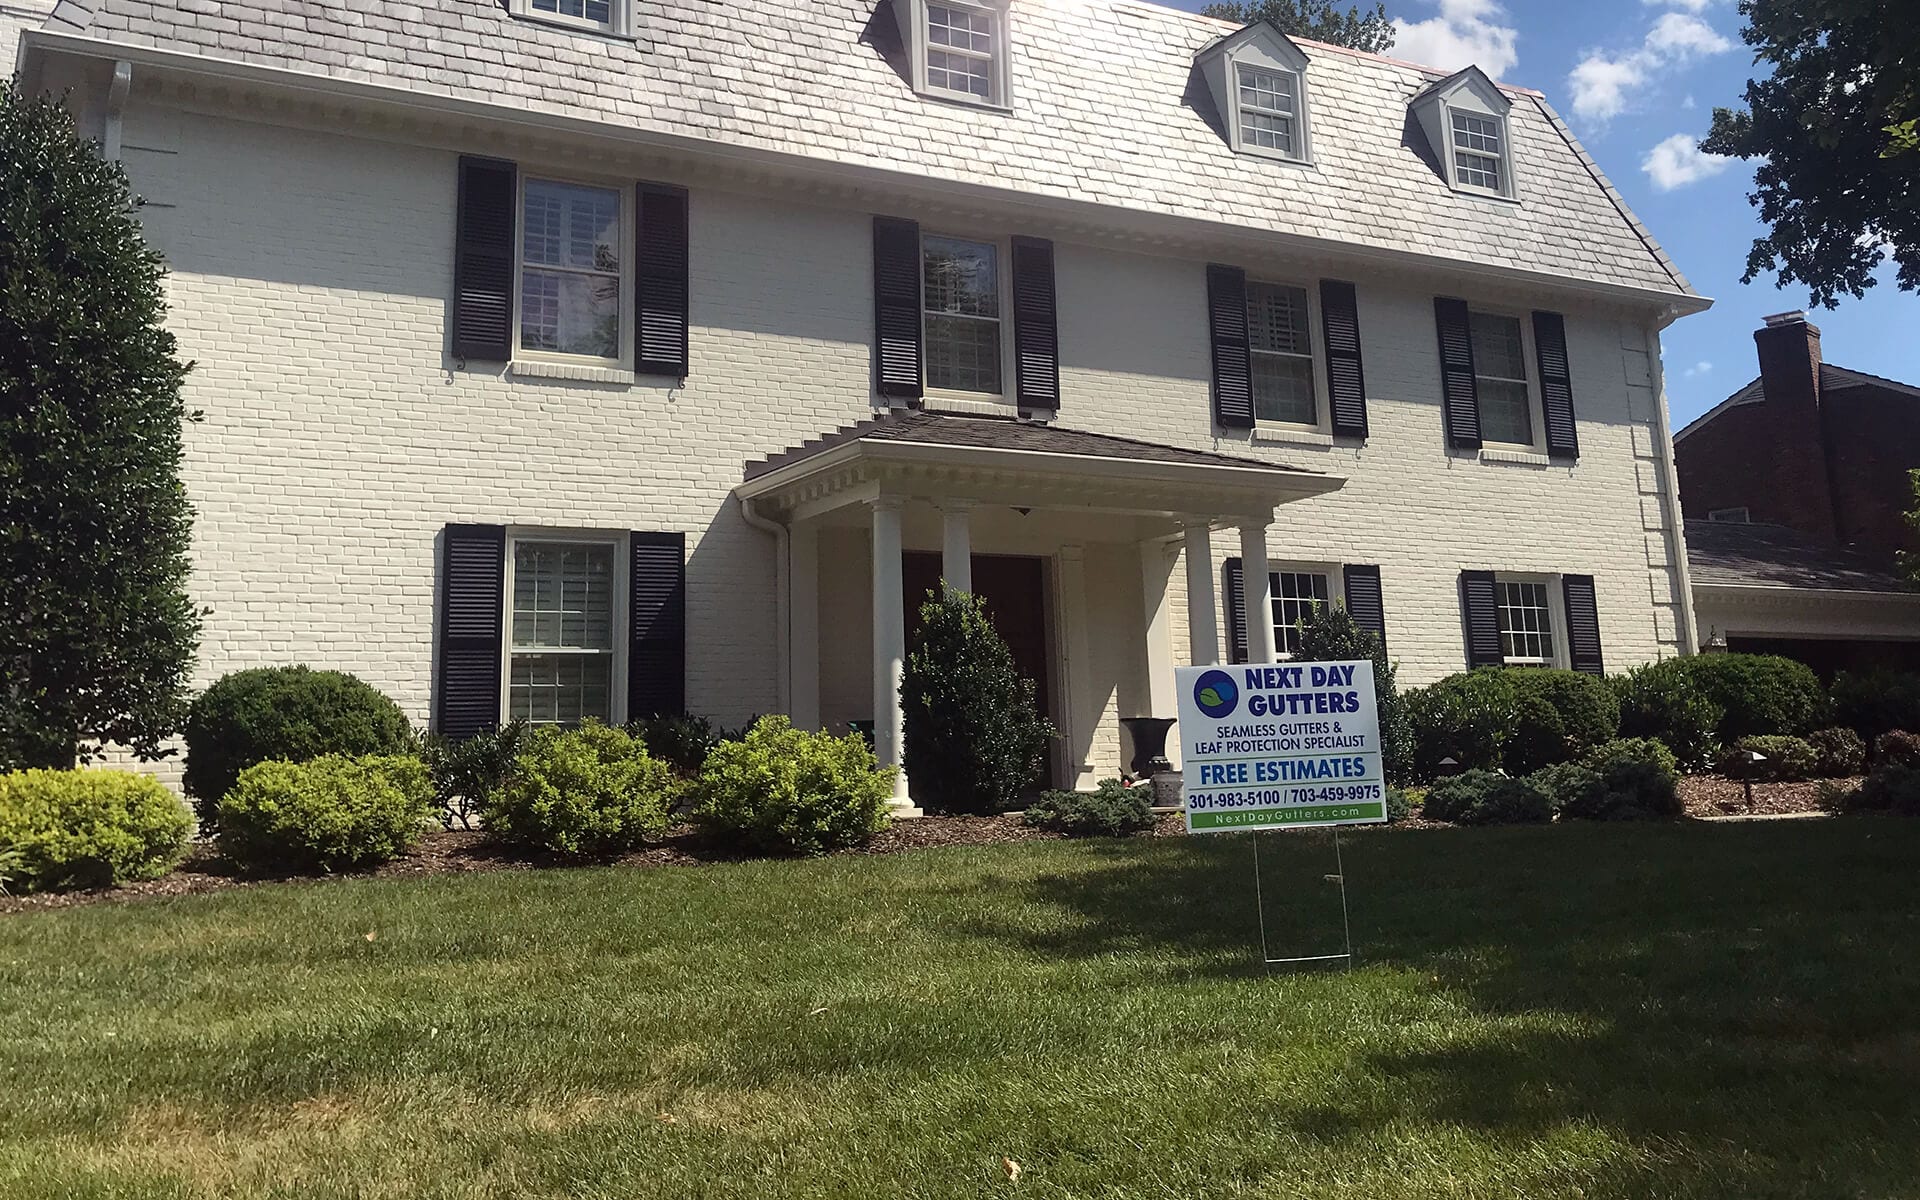 Gutter installation in chevy chase, md